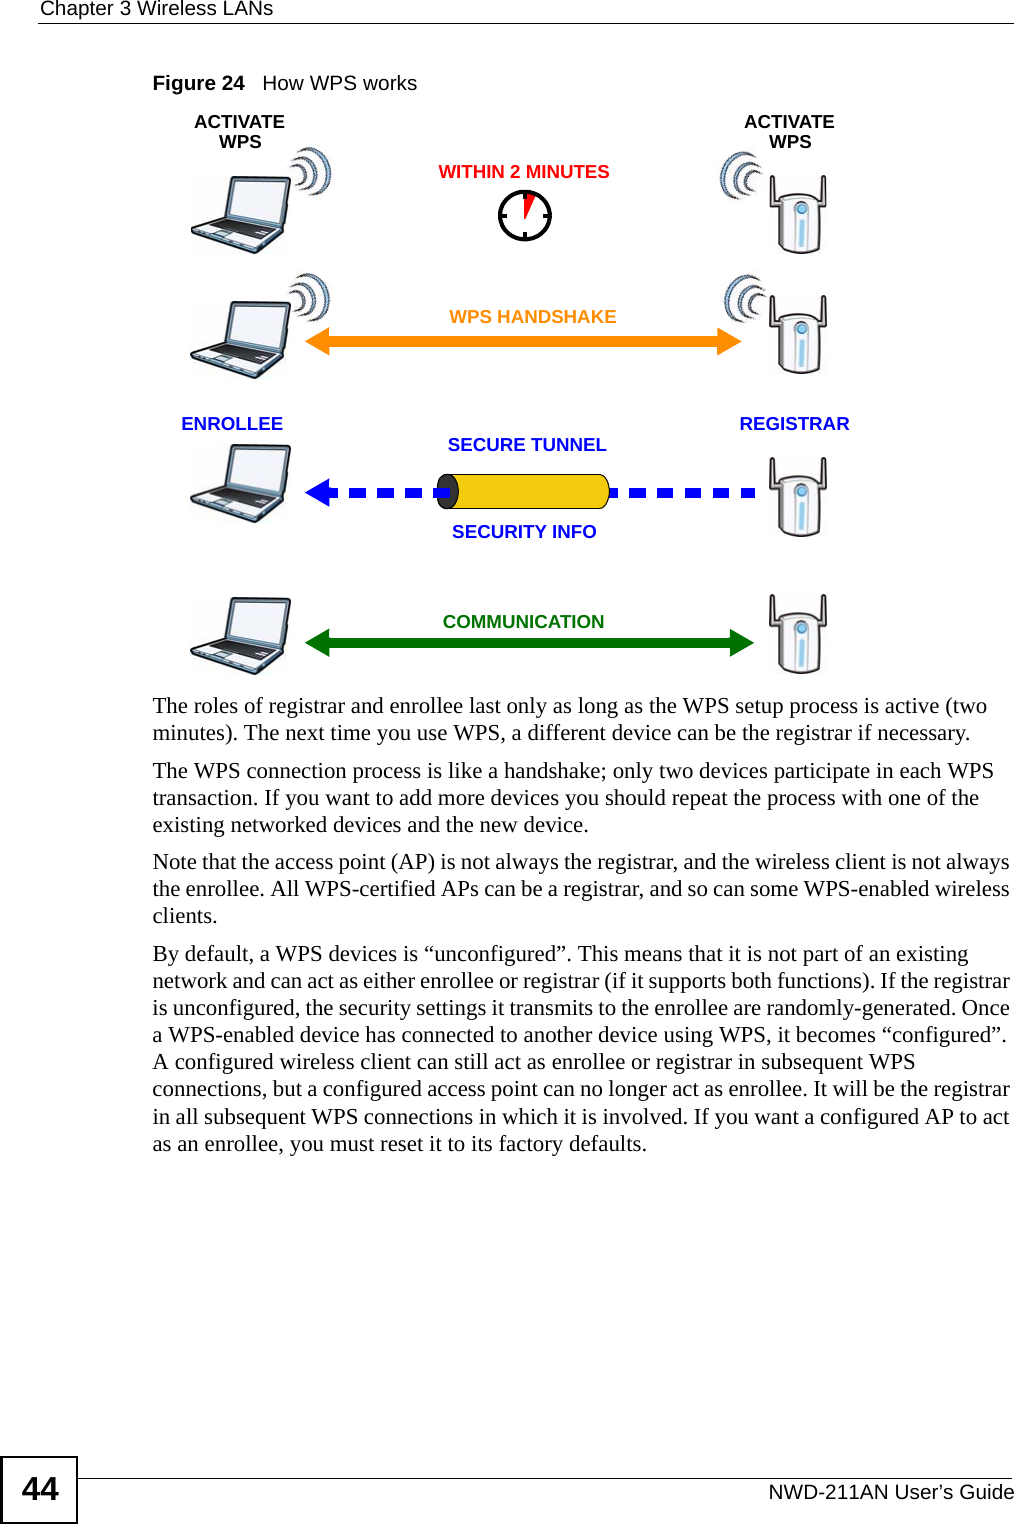 Chapter 3 Wireless LANsNWD-211AN User’s Guide44Figure 24   How WPS worksThe roles of registrar and enrollee last only as long as the WPS setup process is active (two minutes). The next time you use WPS, a different device can be the registrar if necessary.The WPS connection process is like a handshake; only two devices participate in each WPS transaction. If you want to add more devices you should repeat the process with one of the existing networked devices and the new device.Note that the access point (AP) is not always the registrar, and the wireless client is not always the enrollee. All WPS-certified APs can be a registrar, and so can some WPS-enabled wireless clients.By default, a WPS devices is “unconfigured”. This means that it is not part of an existing network and can act as either enrollee or registrar (if it supports both functions). If the registrar is unconfigured, the security settings it transmits to the enrollee are randomly-generated. Once a WPS-enabled device has connected to another device using WPS, it becomes “configured”. A configured wireless client can still act as enrollee or registrar in subsequent WPS connections, but a configured access point can no longer act as enrollee. It will be the registrar in all subsequent WPS connections in which it is involved. If you want a configured AP to act as an enrollee, you must reset it to its factory defaults.SECURE TUNNELSECURITY INFOWITHIN 2 MINUTESCOMMUNICATIONACTIVATEWPSACTIVATEWPSWPS HANDSHAKEREGISTRARENROLLEE